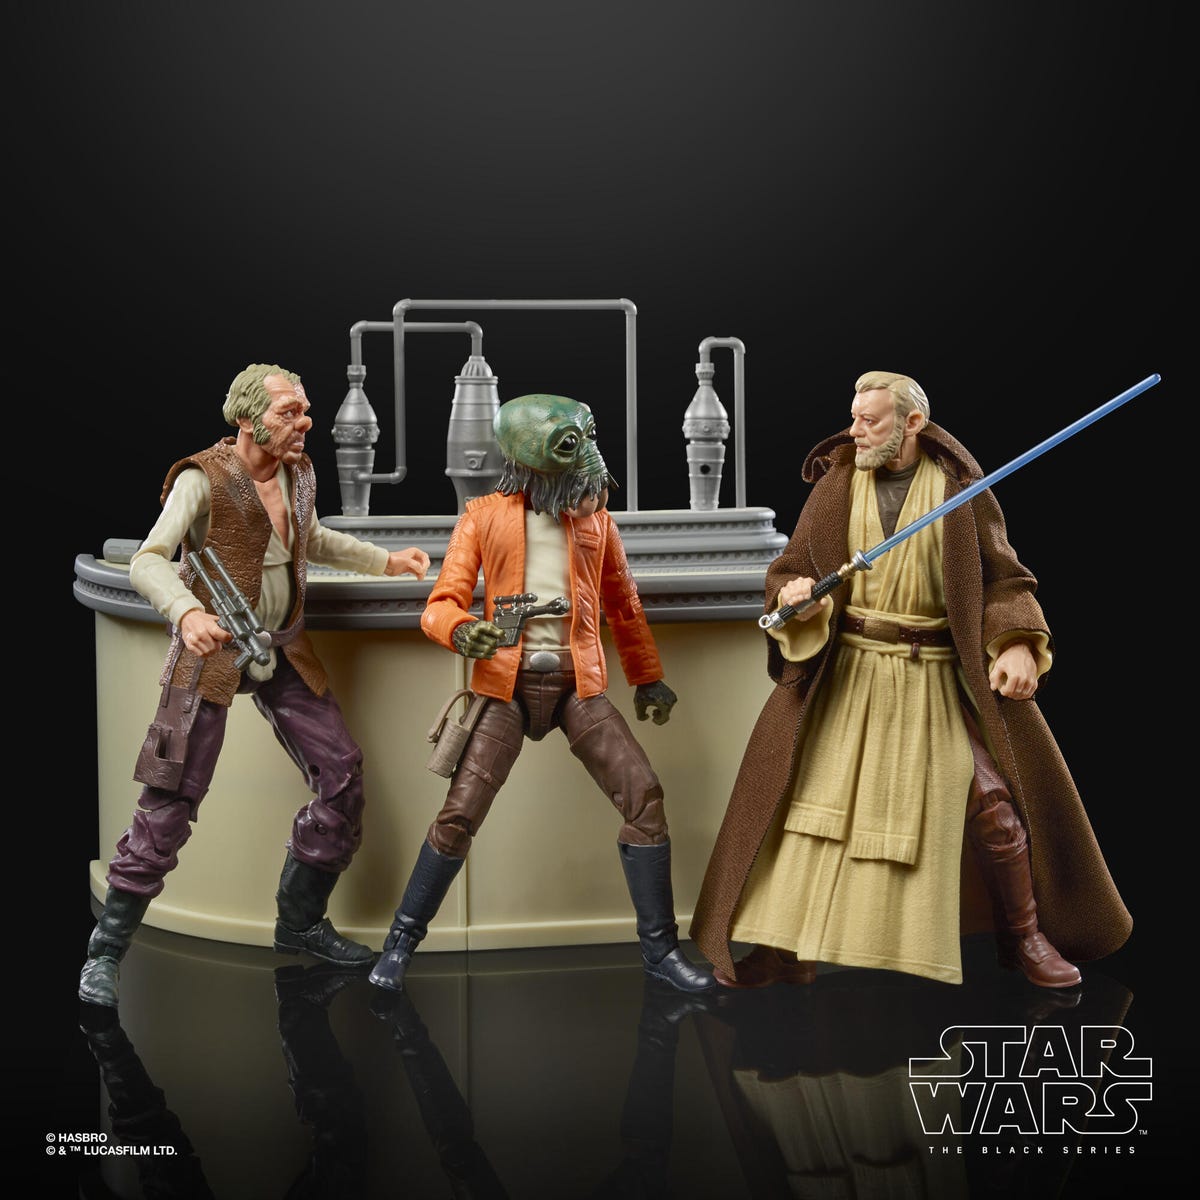 Star Wars Black Series Cantina Showdown playset in package